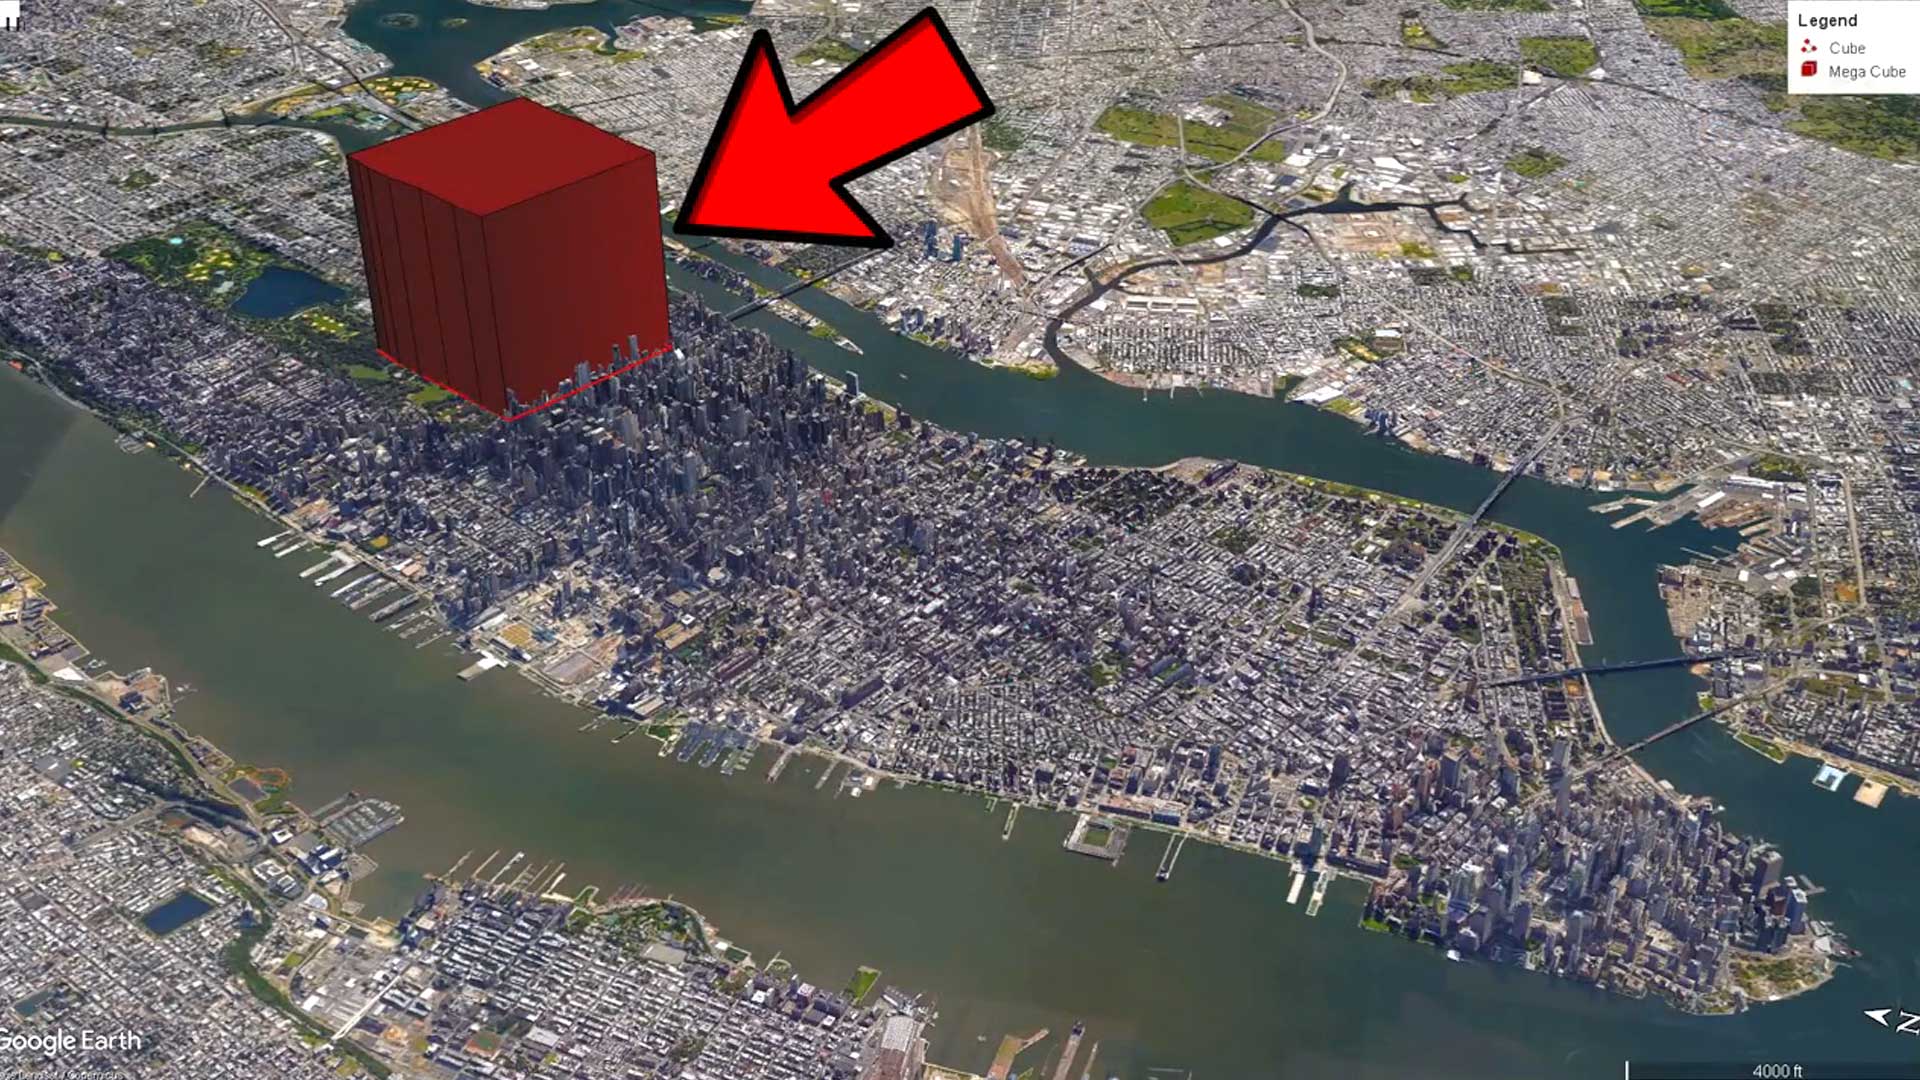 What If Everyone On Earth Lived Together In One Giant Building?